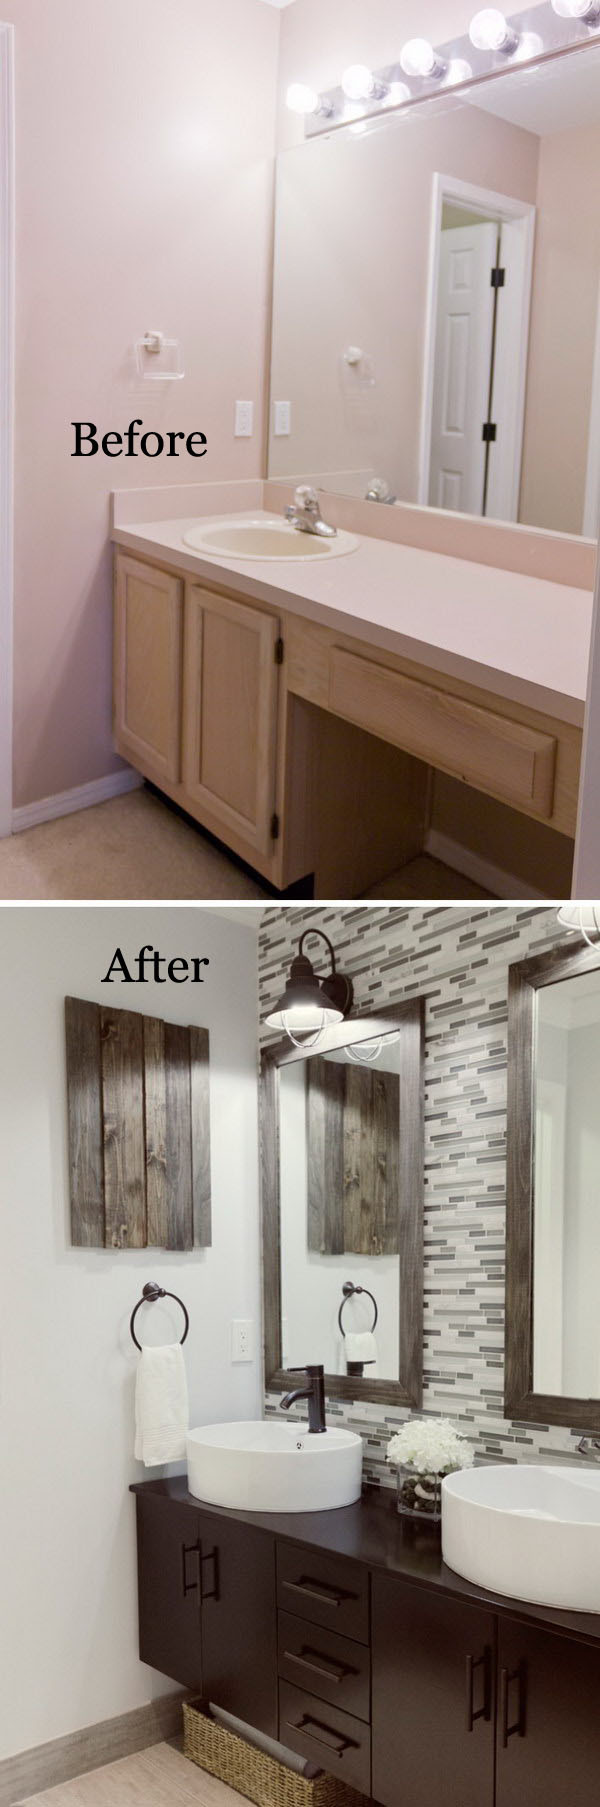 Bathroom Remodel Before And After
 Before and After 20 Awesome Bathroom Makeovers Hative